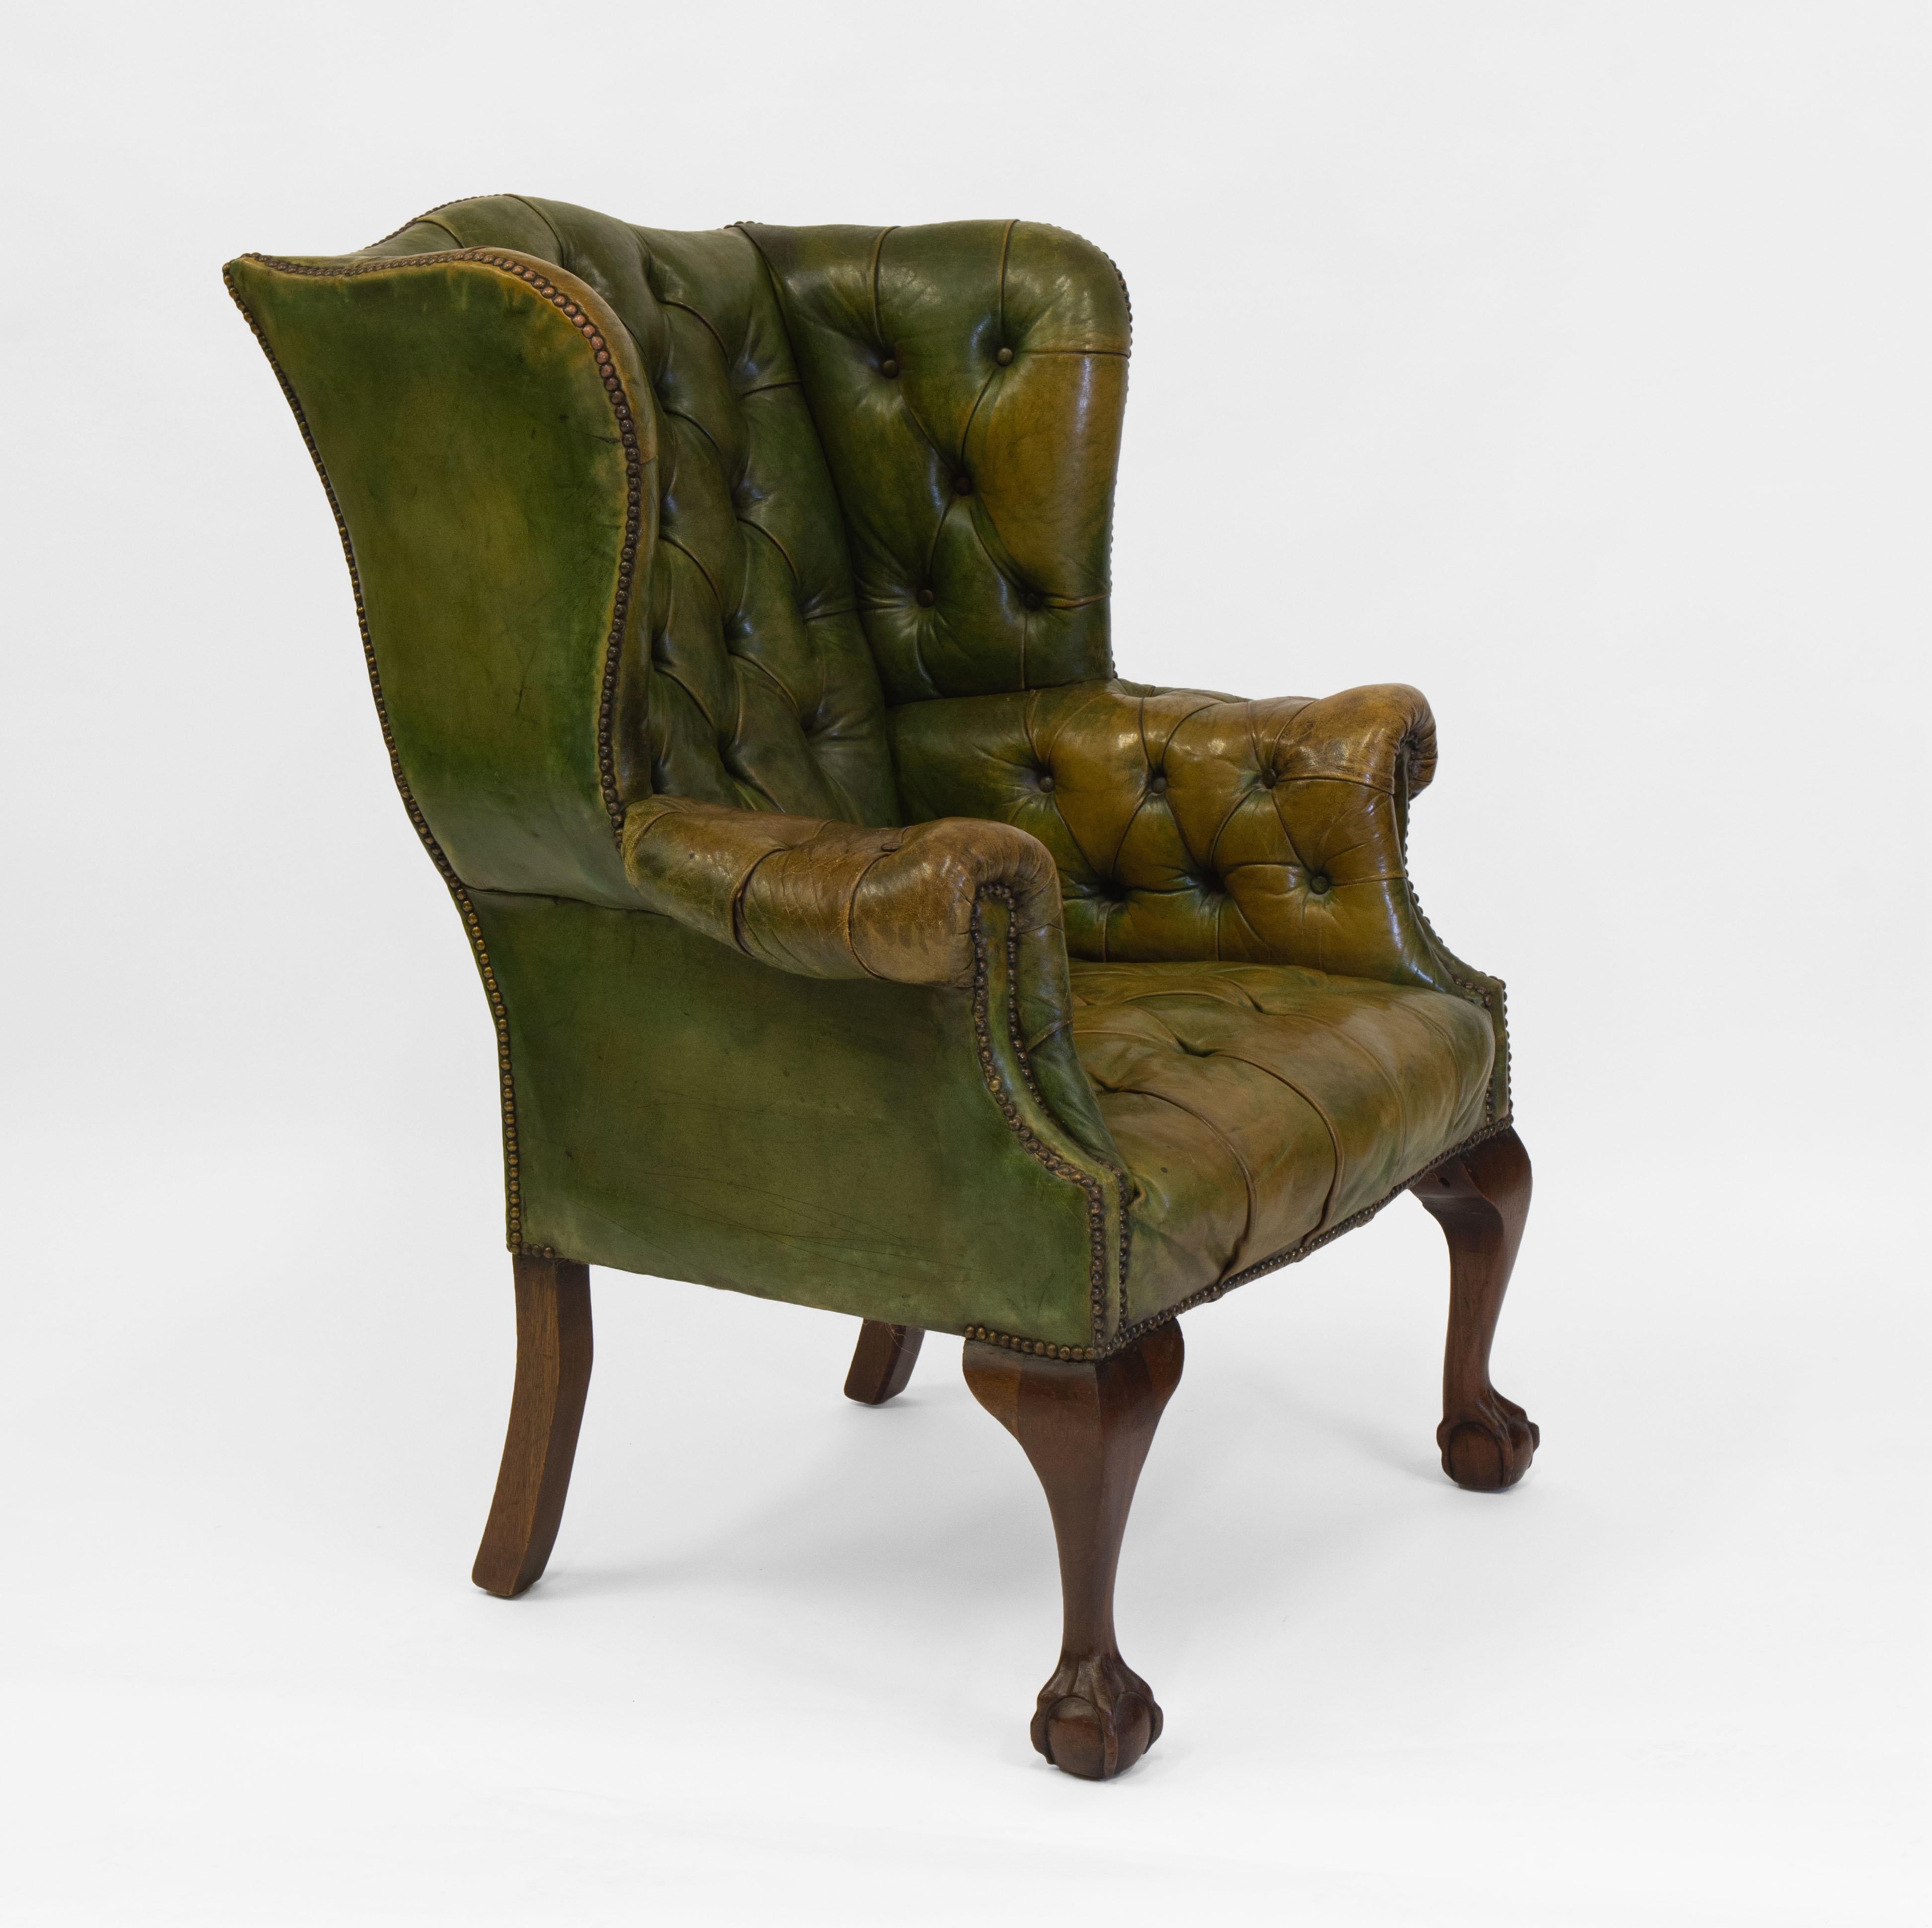 A fabulous antique green leather button wing back armchair, standing on hand carved claw and ball feet to the front. In the Georgian style. Circa 1920’s.

Showing wonderful patina and natural discolouration to the leather, there are scuff marks